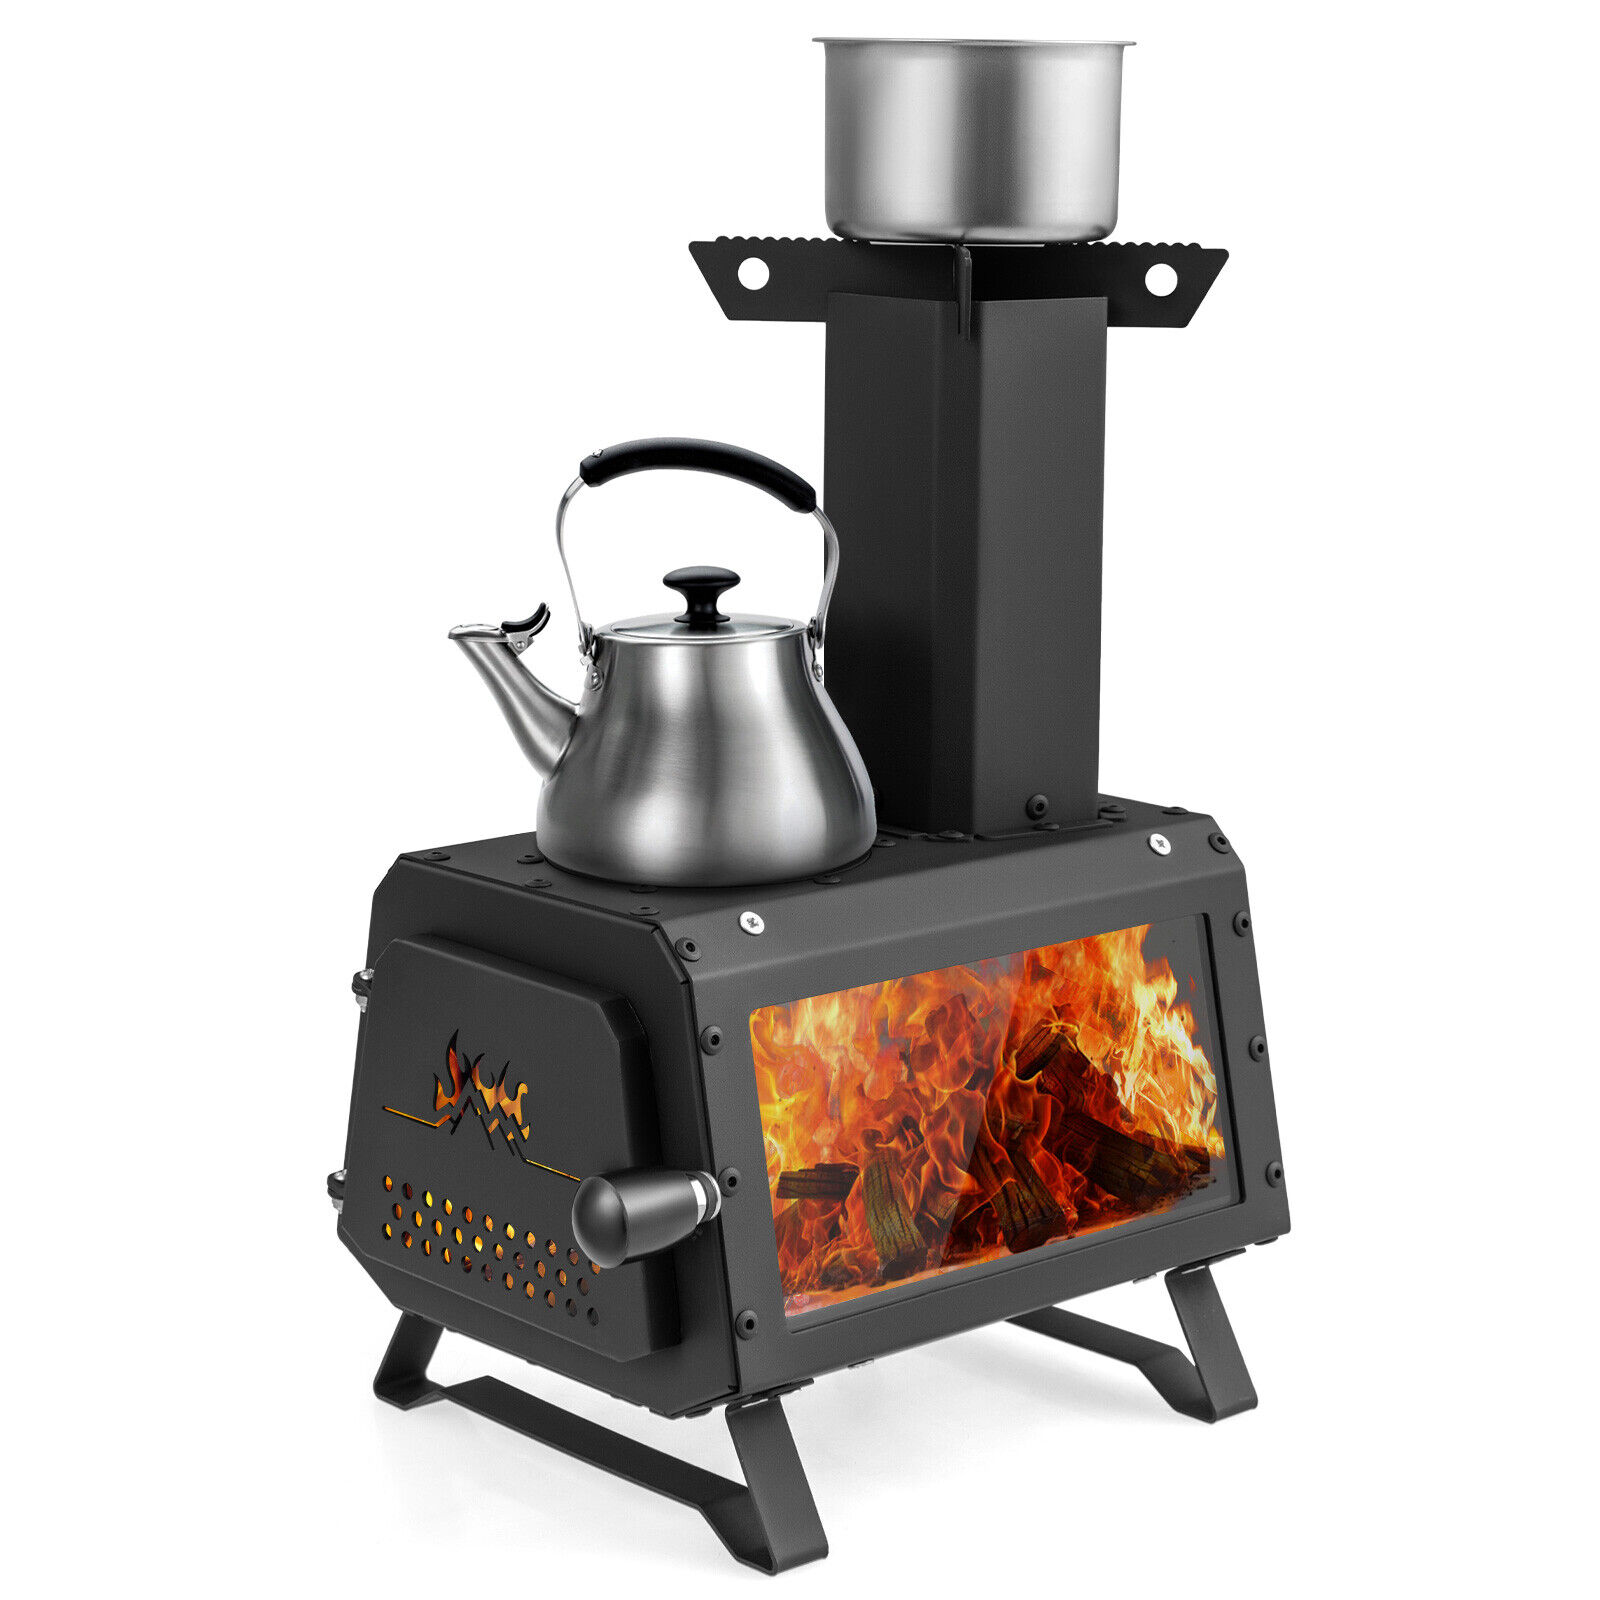 Portable Wood Burning Stove Wood Camping Stove Heater with 2 Cooking Positions